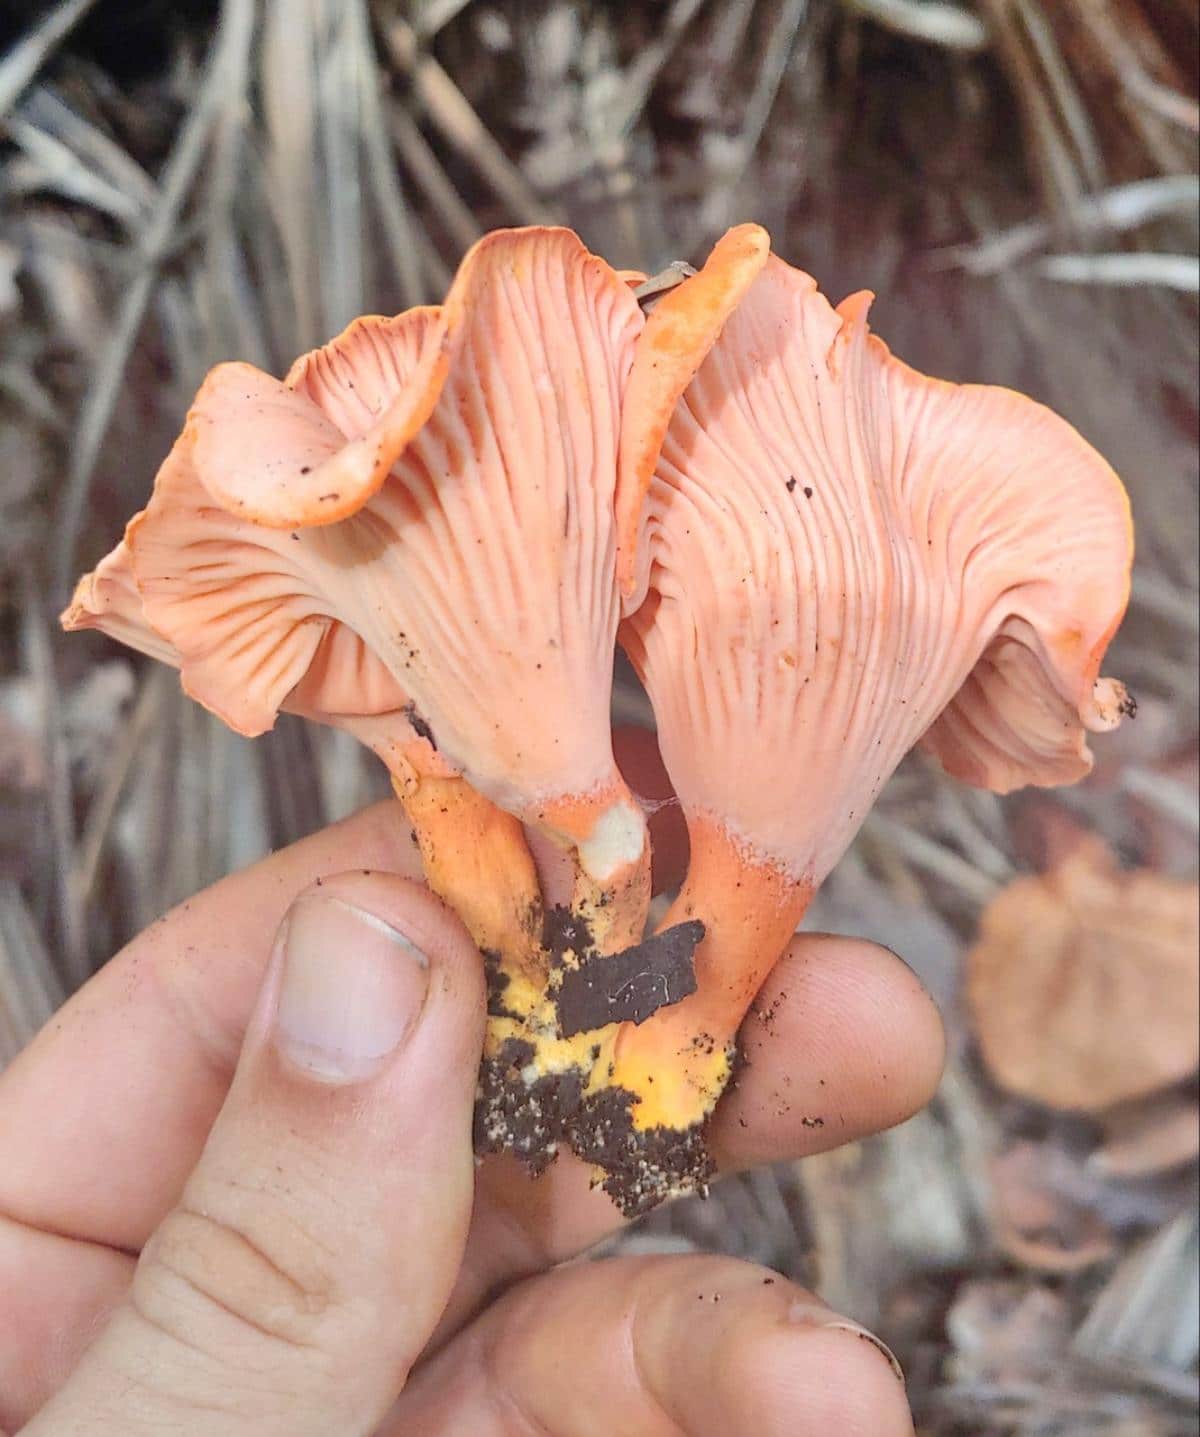 Cantharellus coccolobae